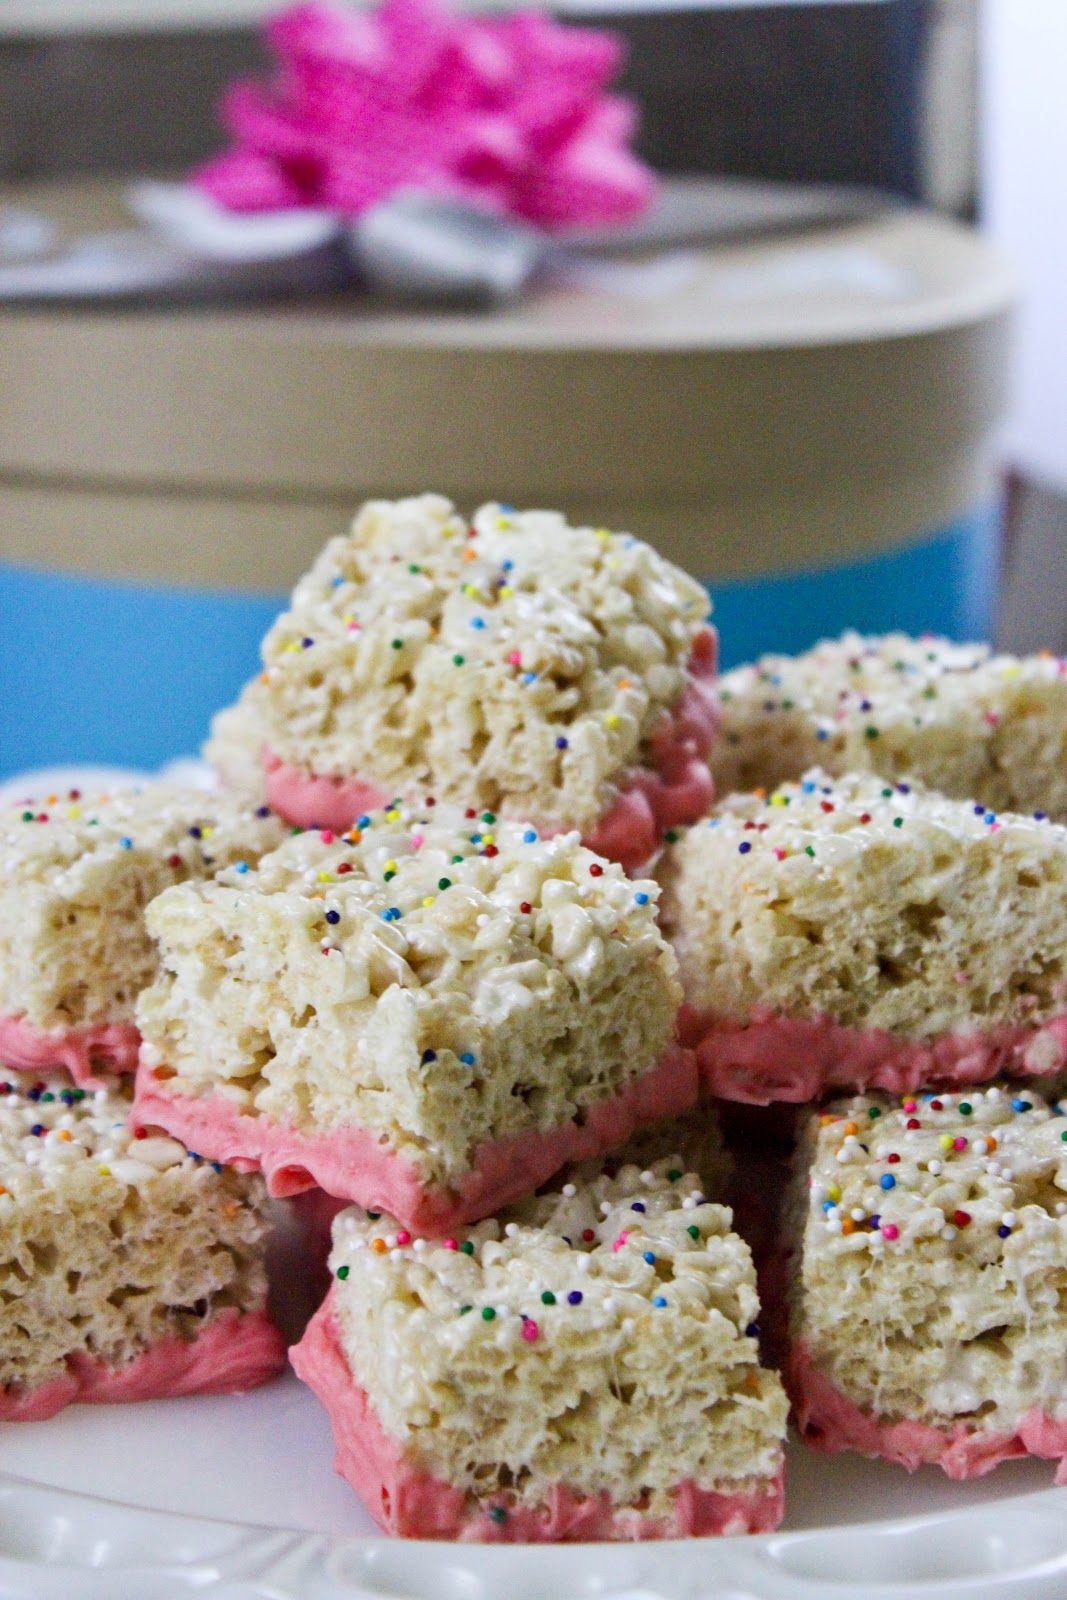 From Dahlias to Doxies: Pink Chocolate Rice Krispie Treats